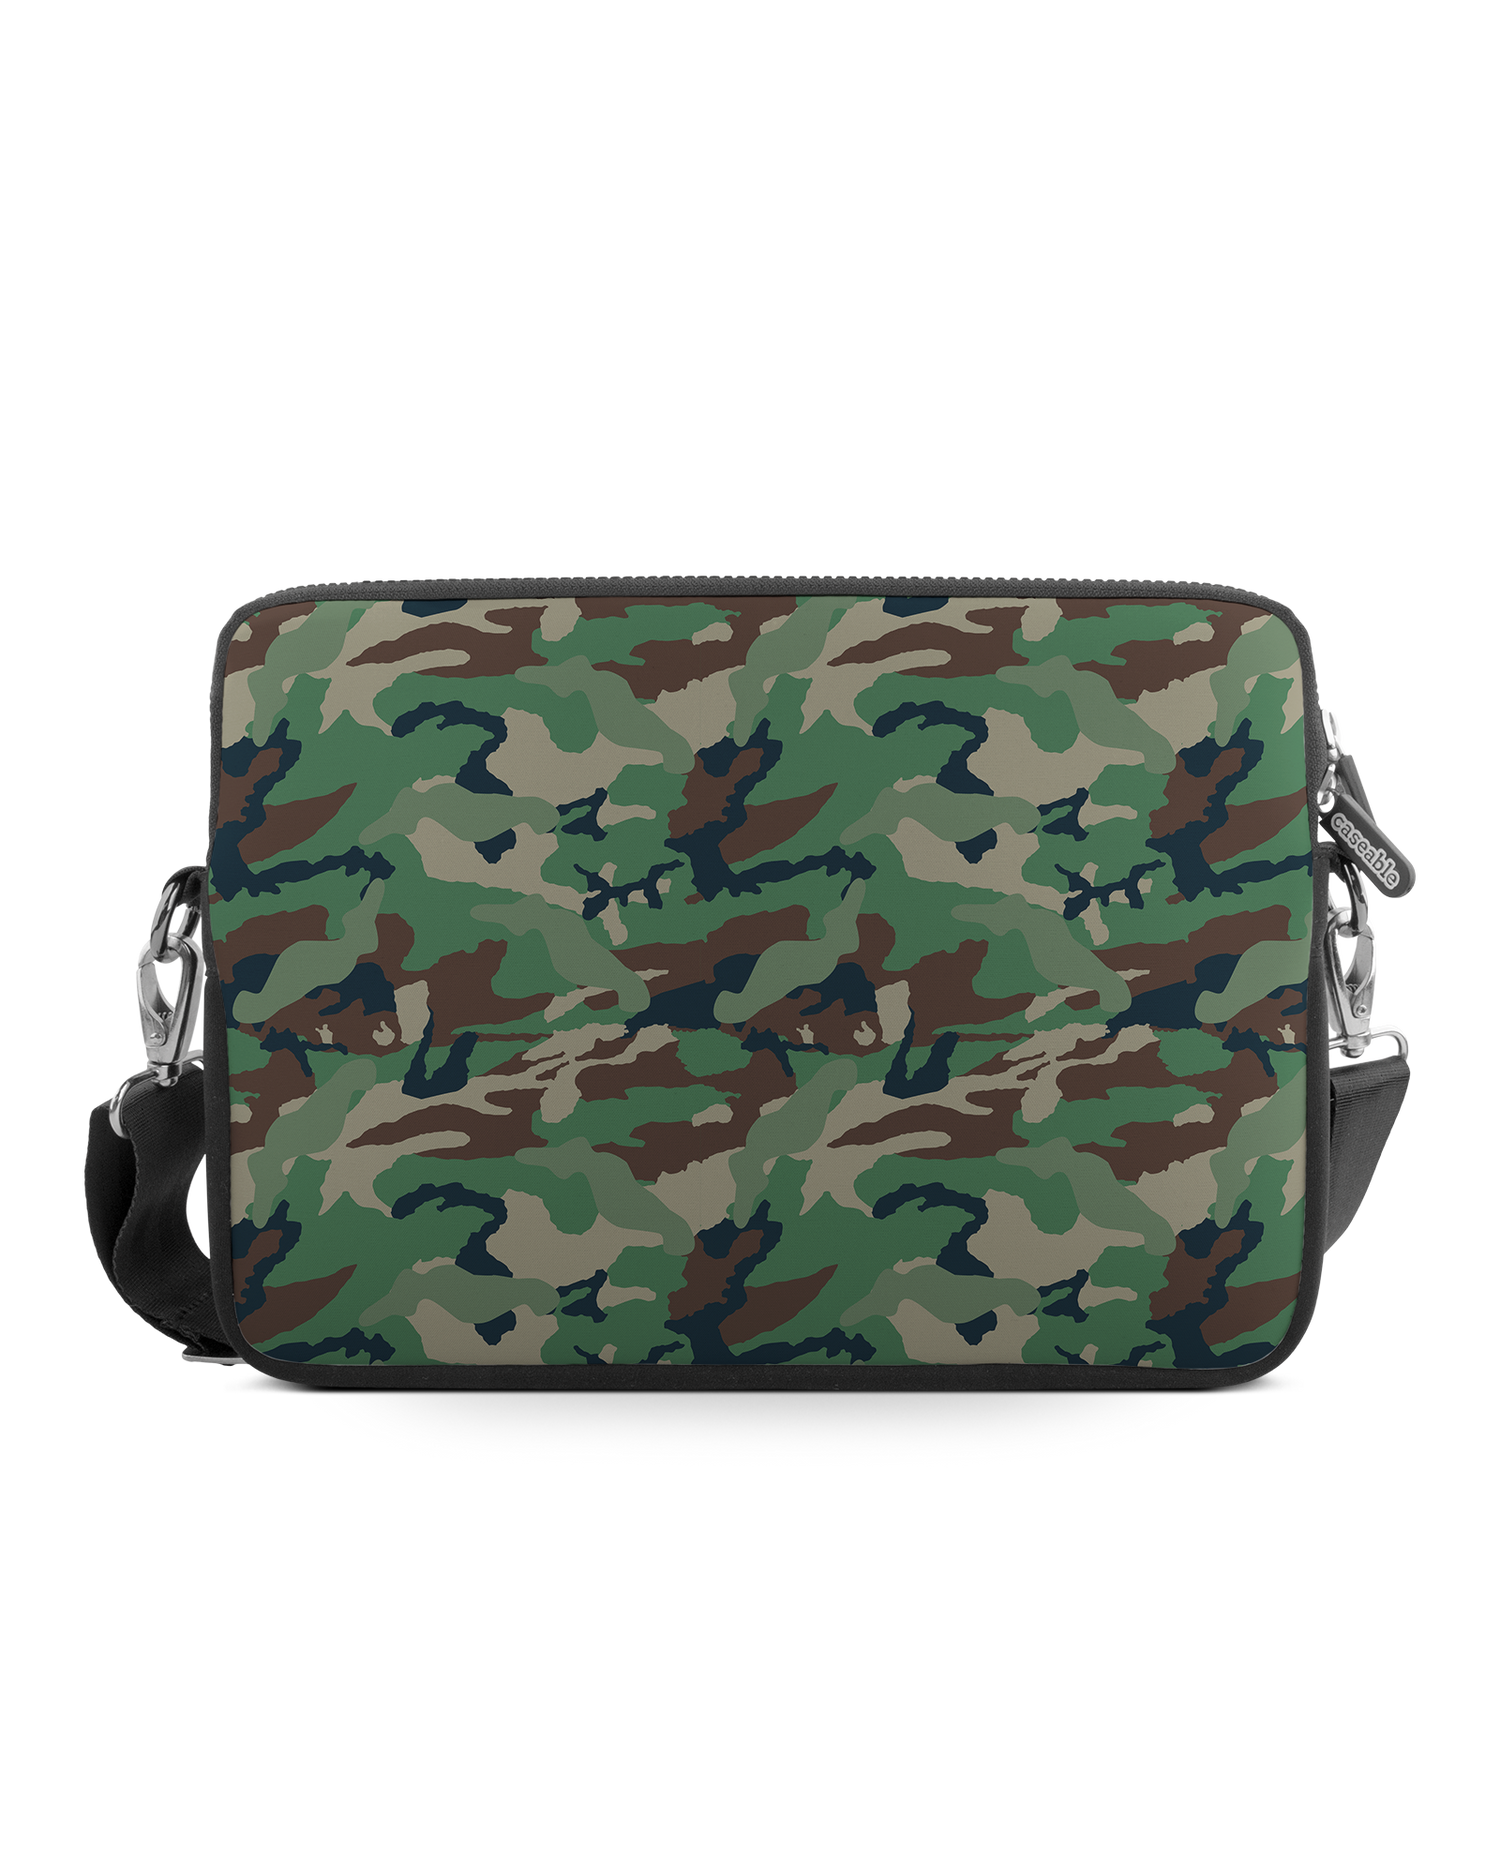 Green and Brown Camo Premium Laptop Bag 13 inch: Front View